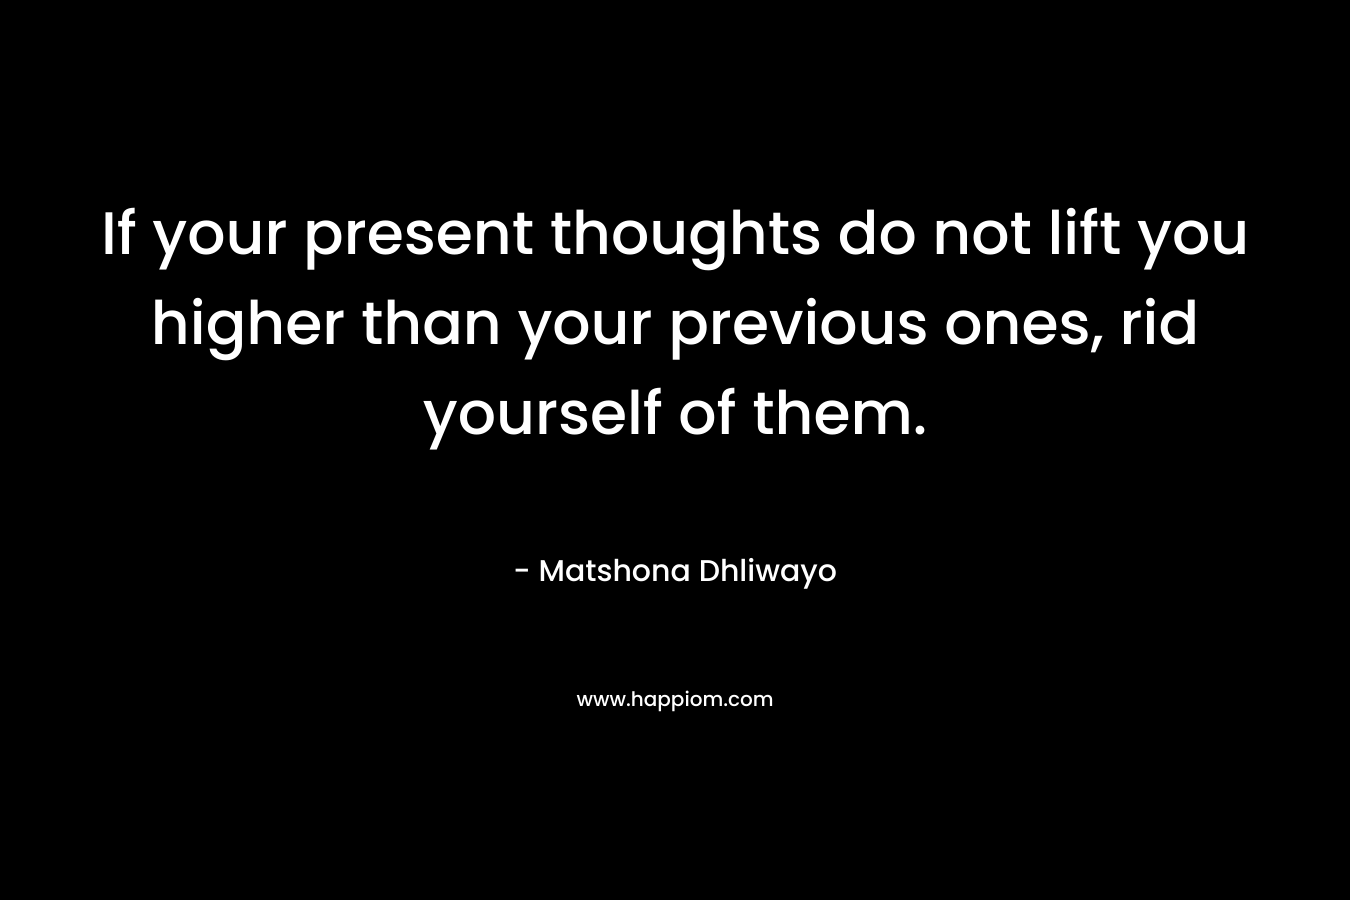 If your present thoughts do not lift you higher than your previous ones, rid yourself of them.